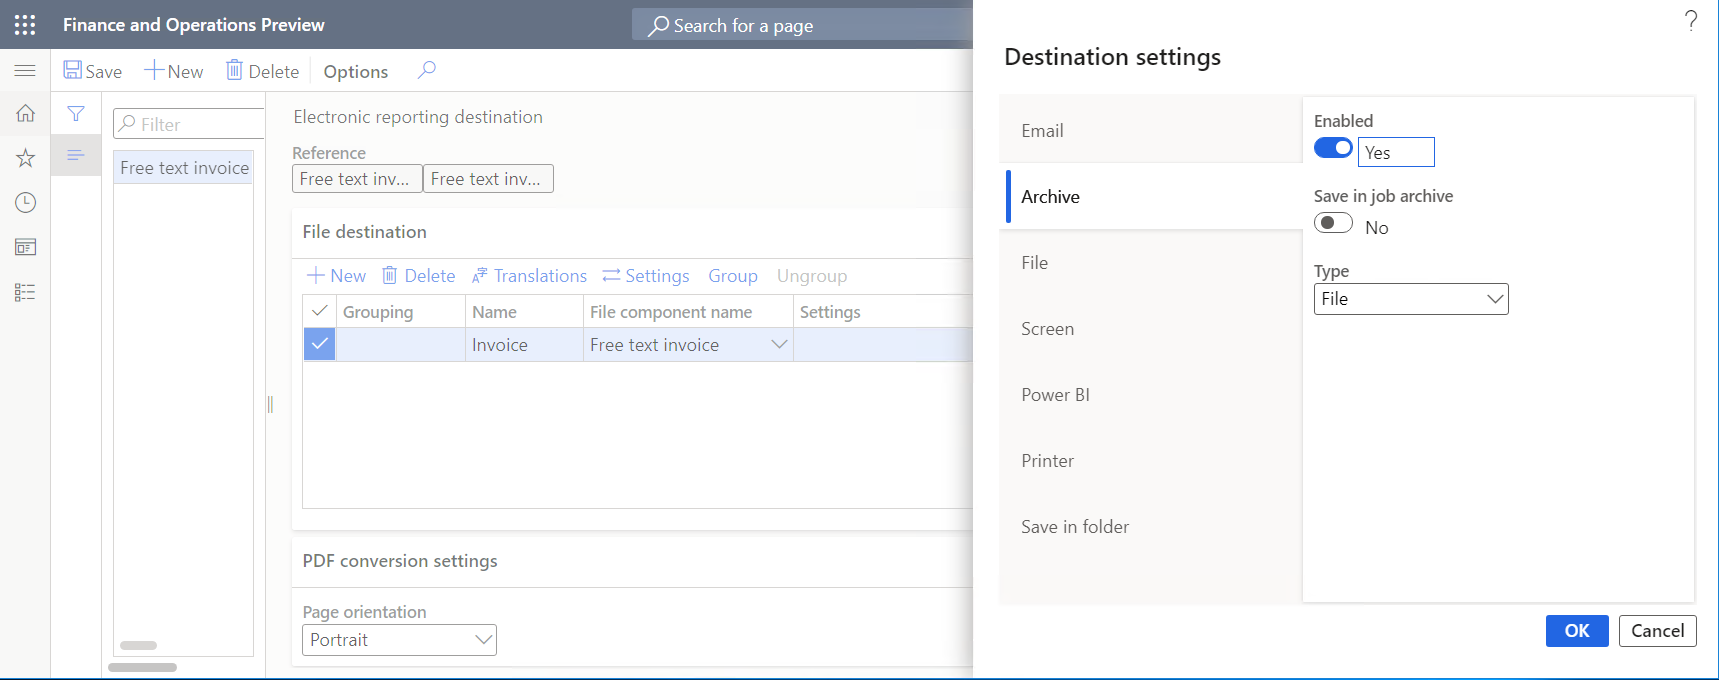 Configuring the Archive destination in the Destination settings dialog box.